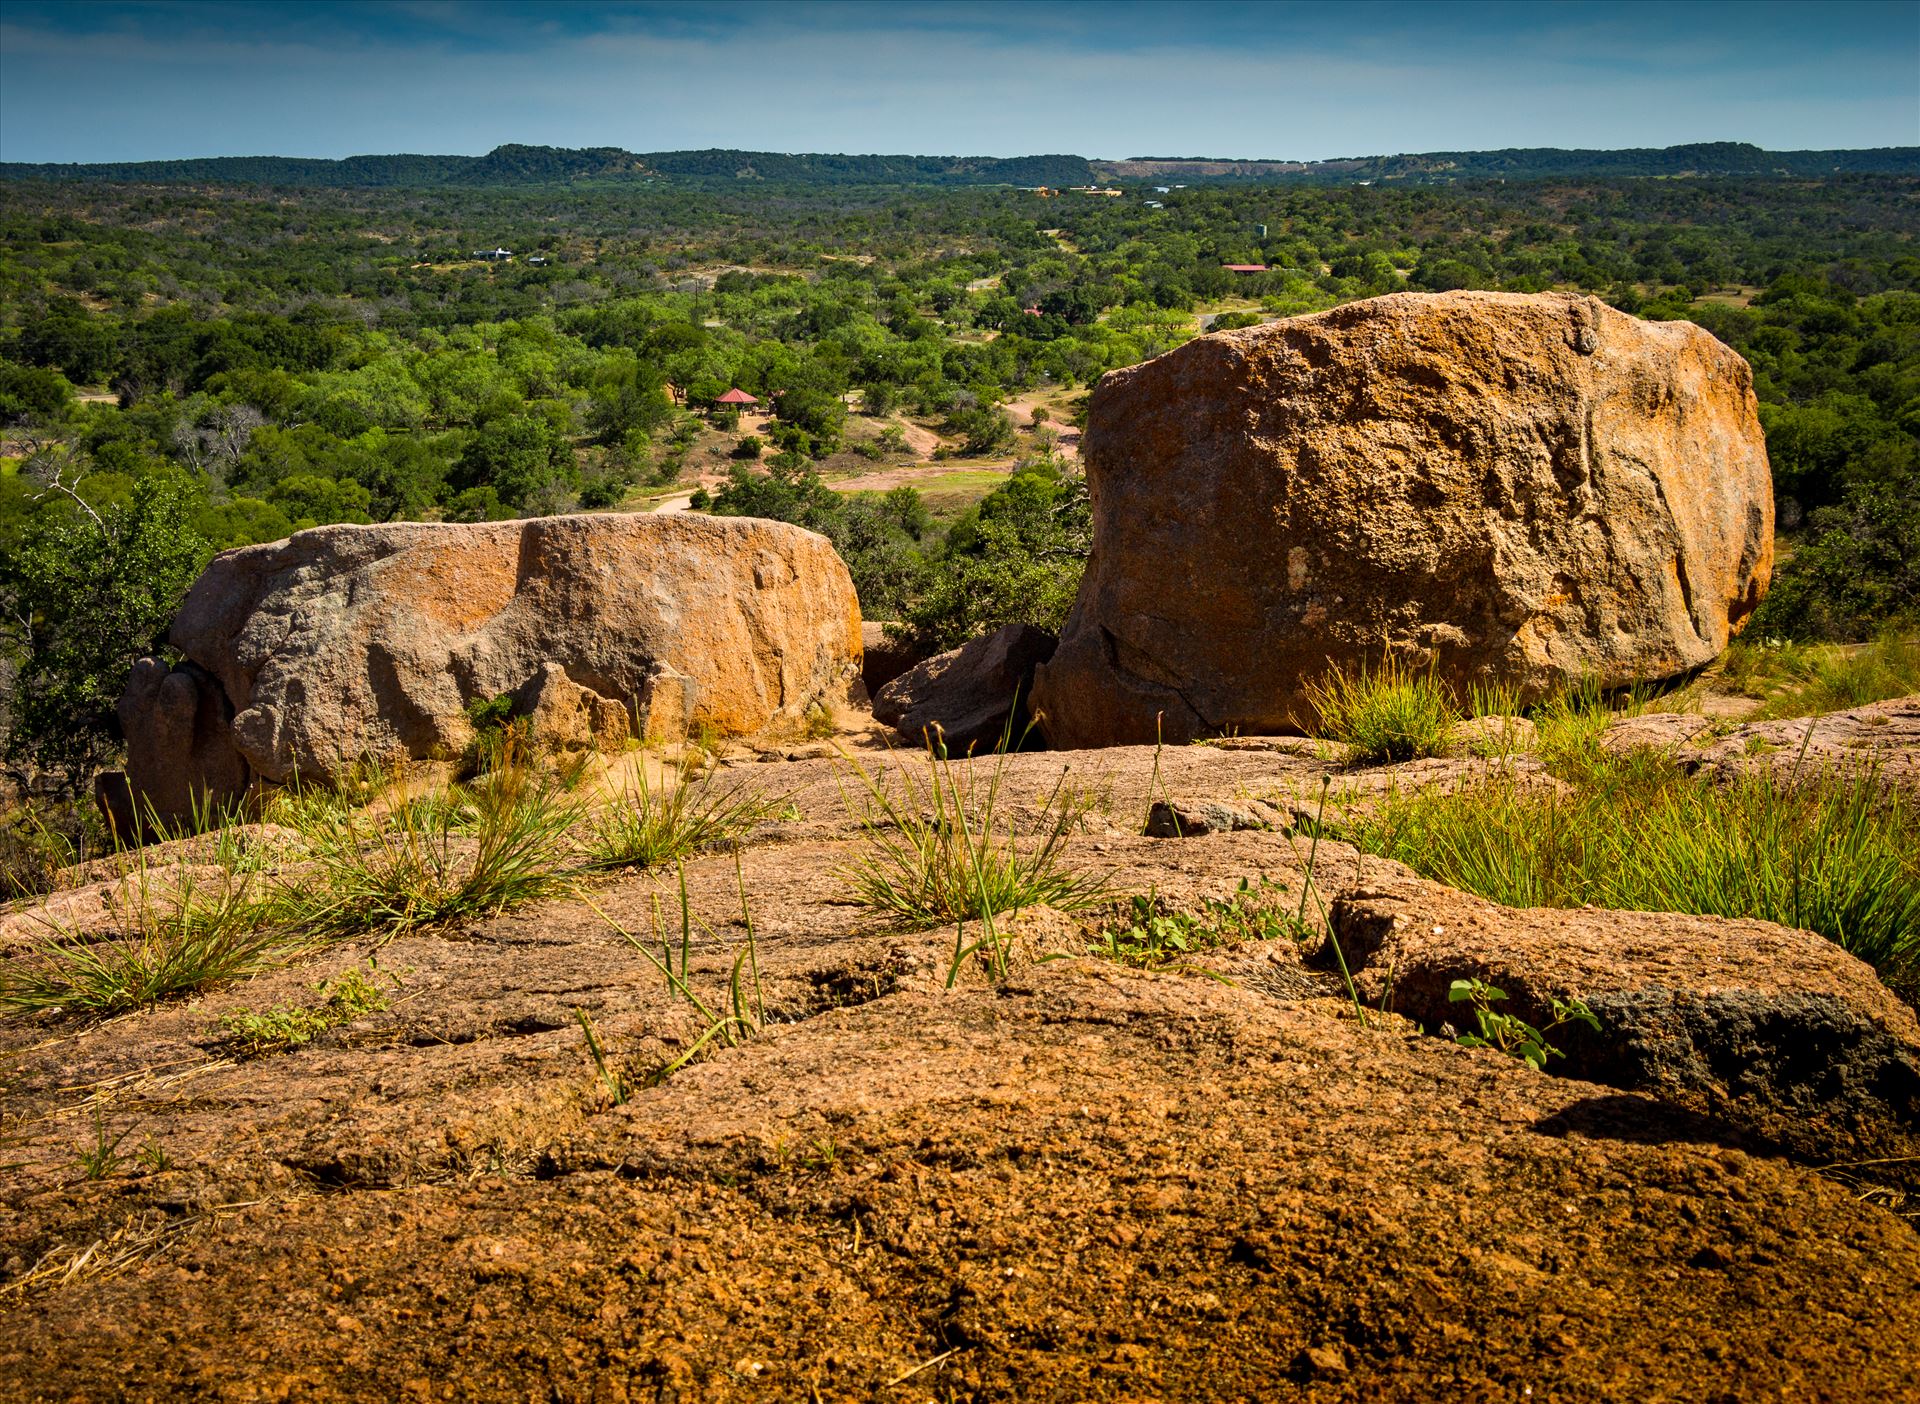 20130723-Enchanted Rock-DSLR-017.jpg  by Charles Smith Photography